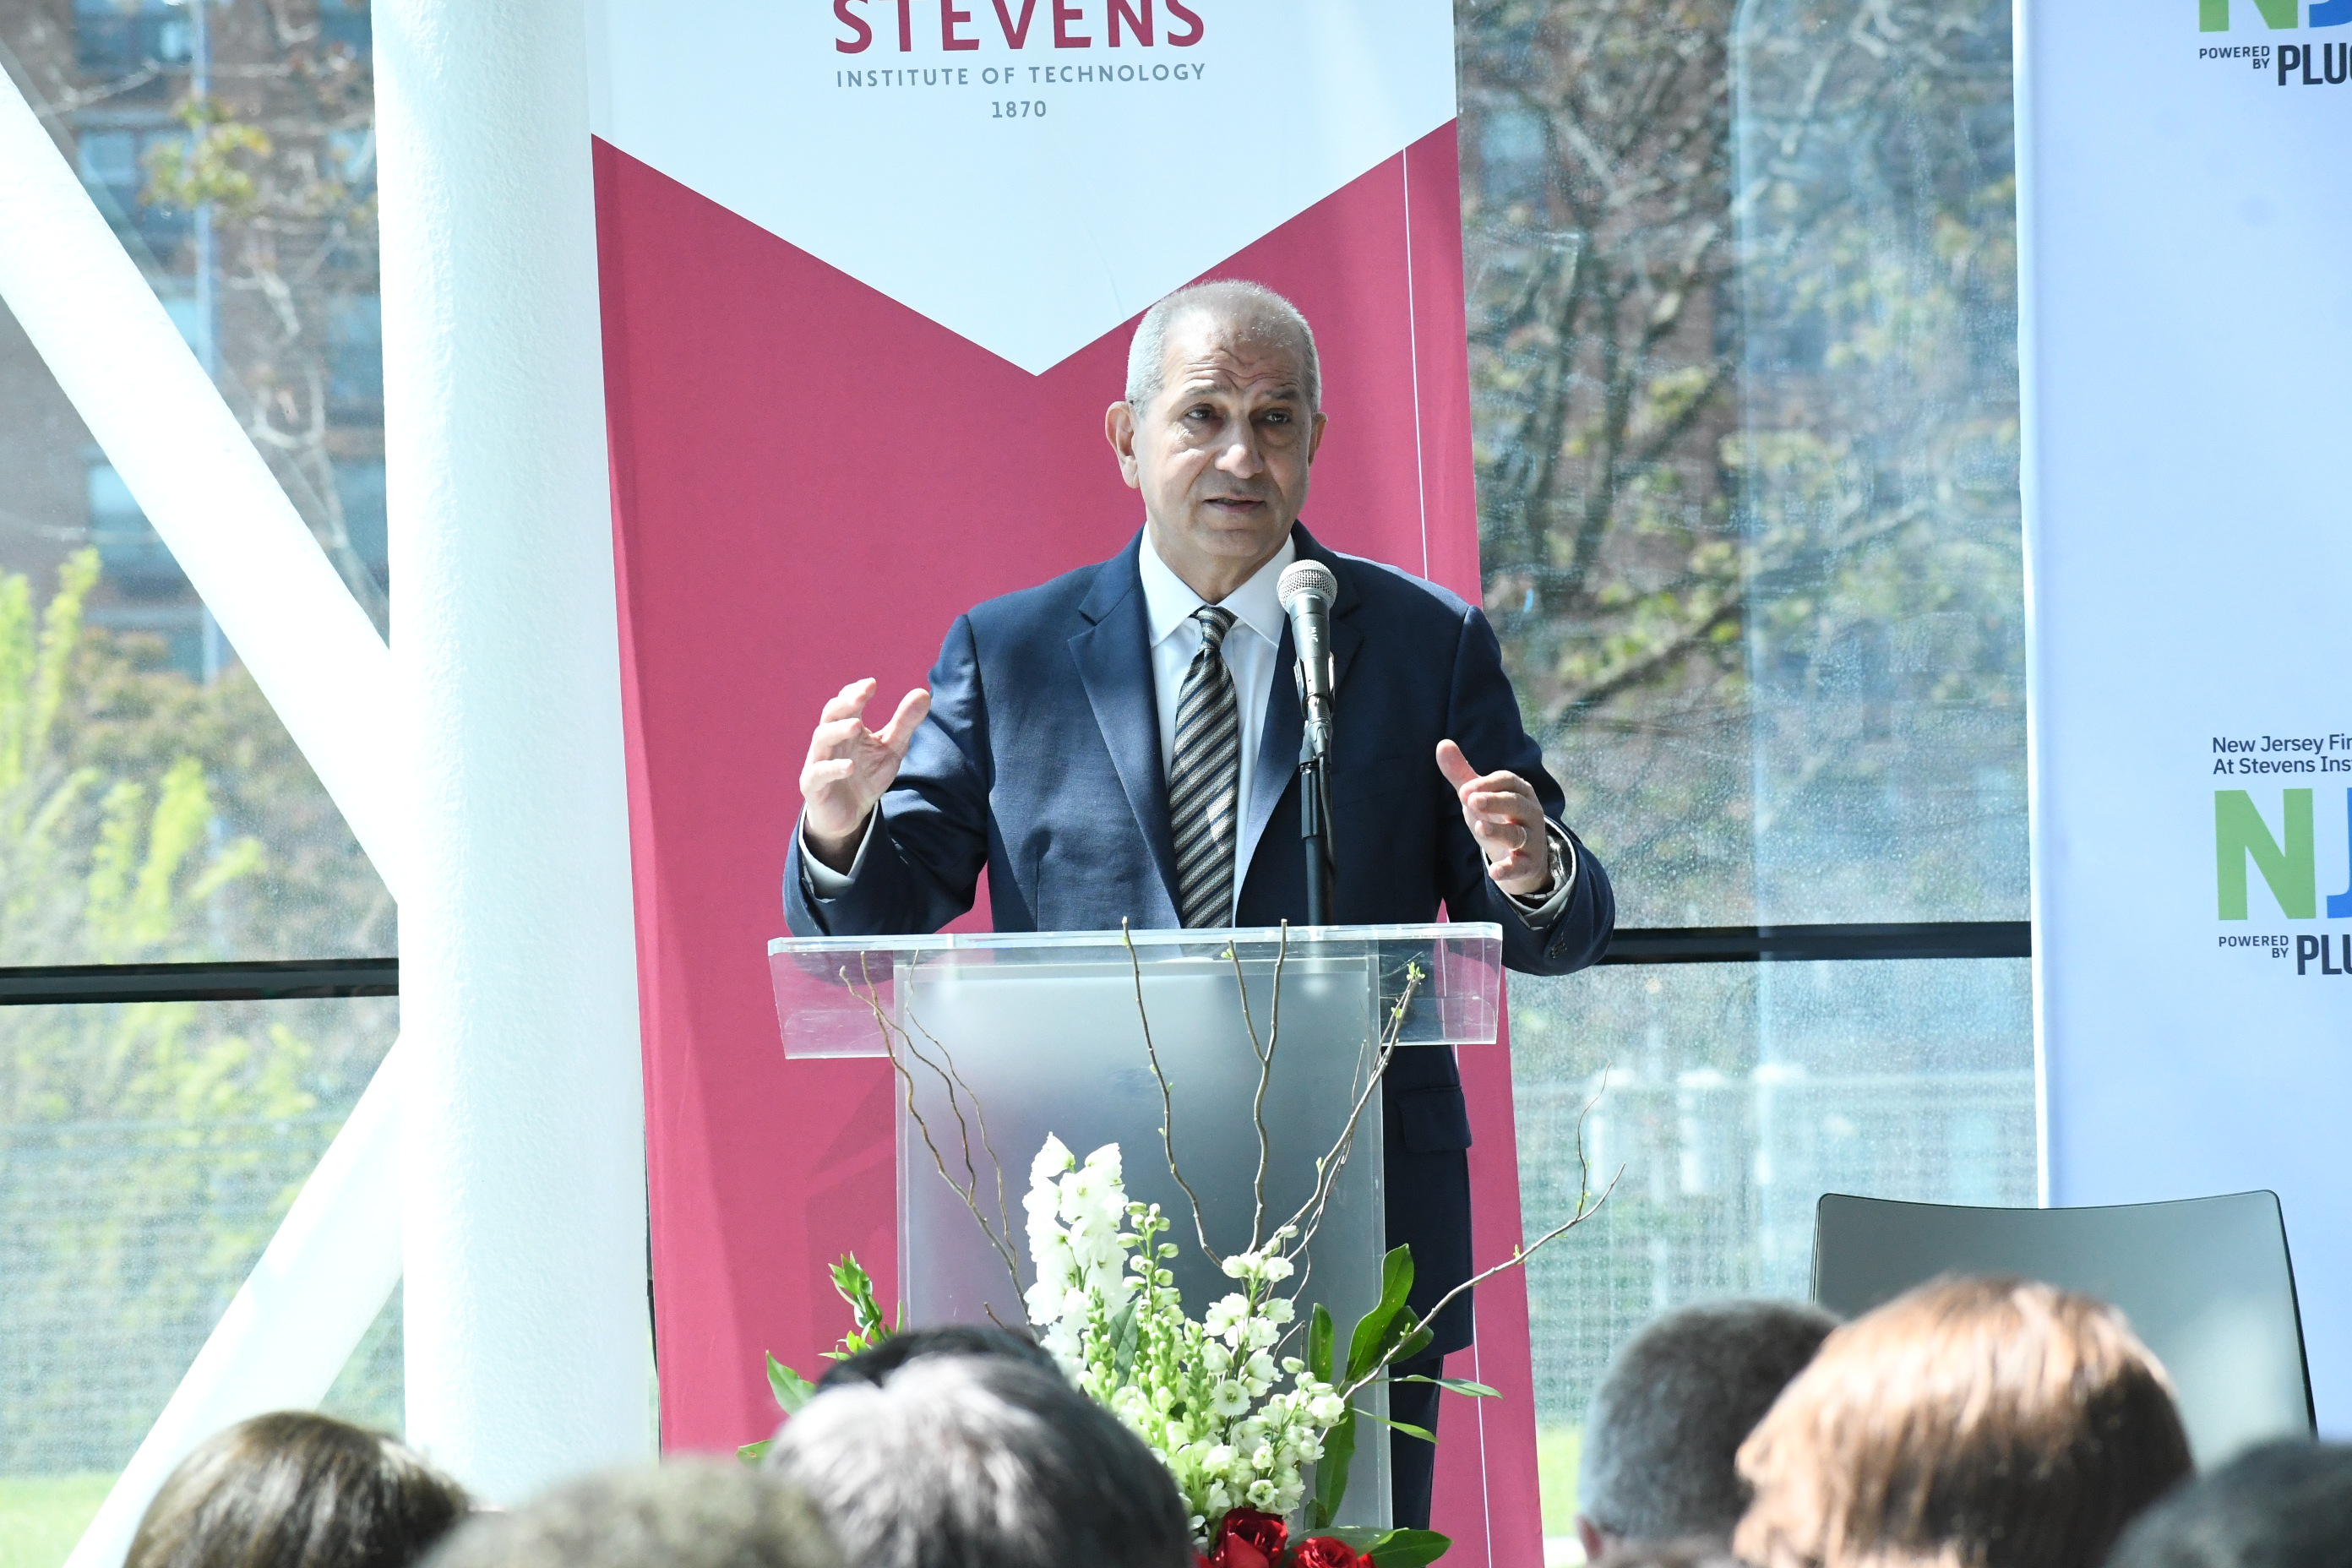 Gov. Phil Murphy, New Jersey Economic Development Authority Executive Director Tim Sullivan and other officials announce the launch of the New Jersey Fintech Accelerator at Stevens Institute of Technology (NJ FAST), which will serve as a hub for financial technology and insurance technology startups. Stevens President Nariman Farvardin is seen speaking at the event.